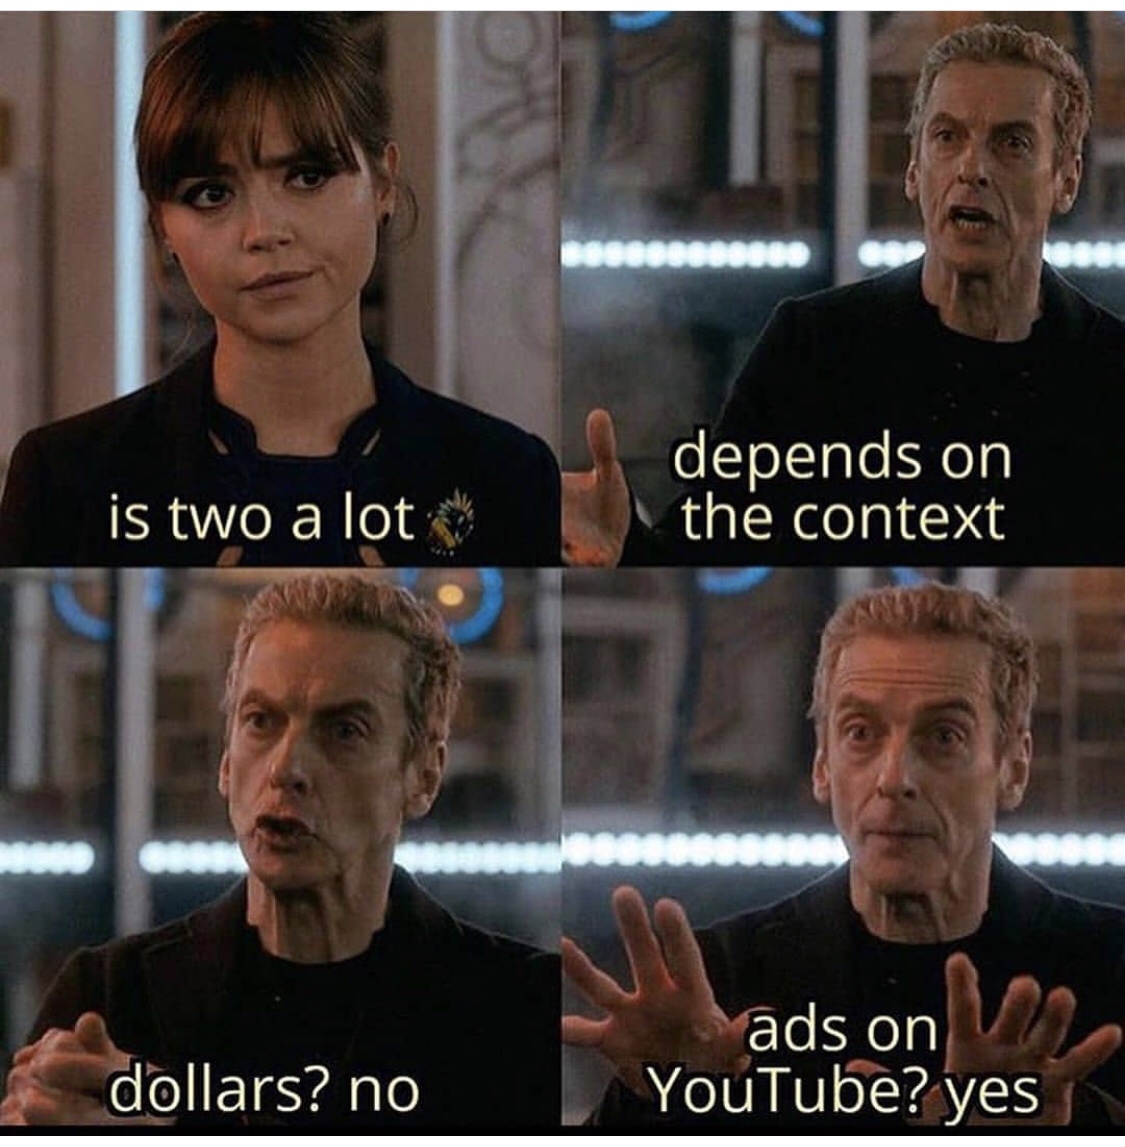 depends on context meme - Tollslllllll is two a lot depends on the context dollars? no ads on YouTube? yes